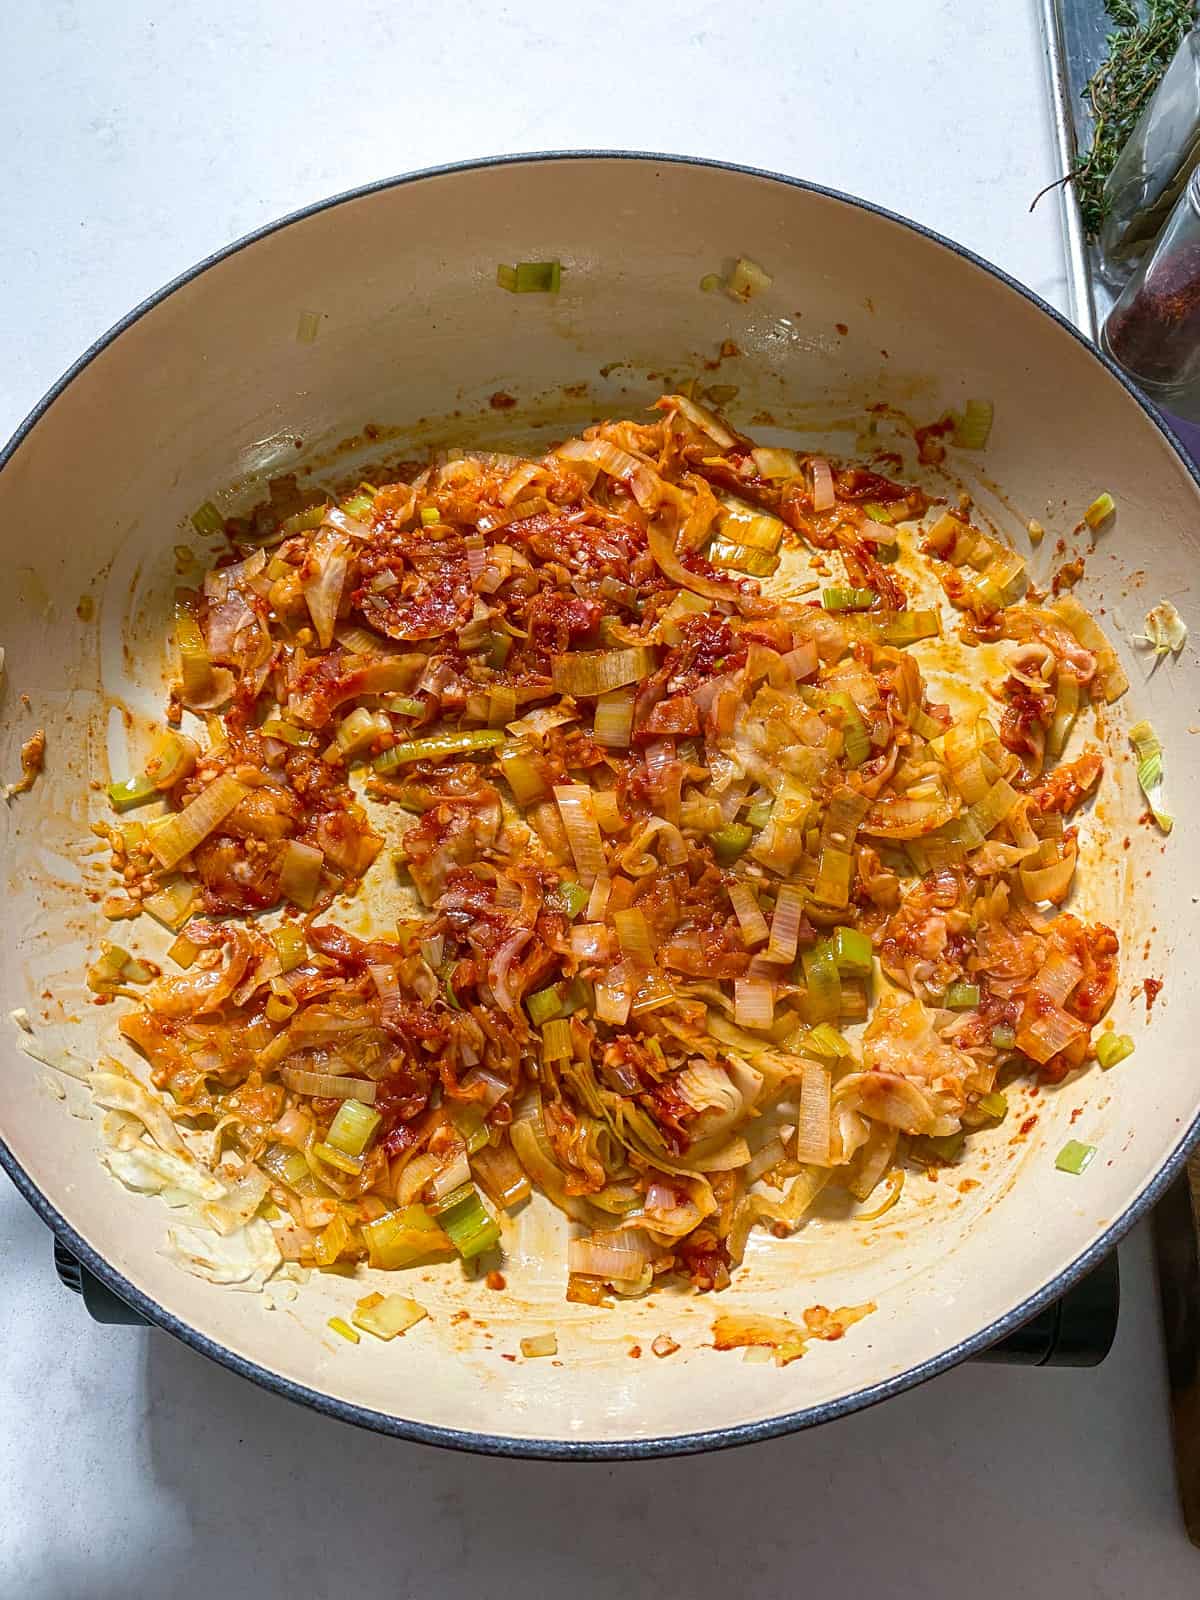 Add tomato paste to the sautéed leeks and fennel and saute the tomato paste into the oil and butter.